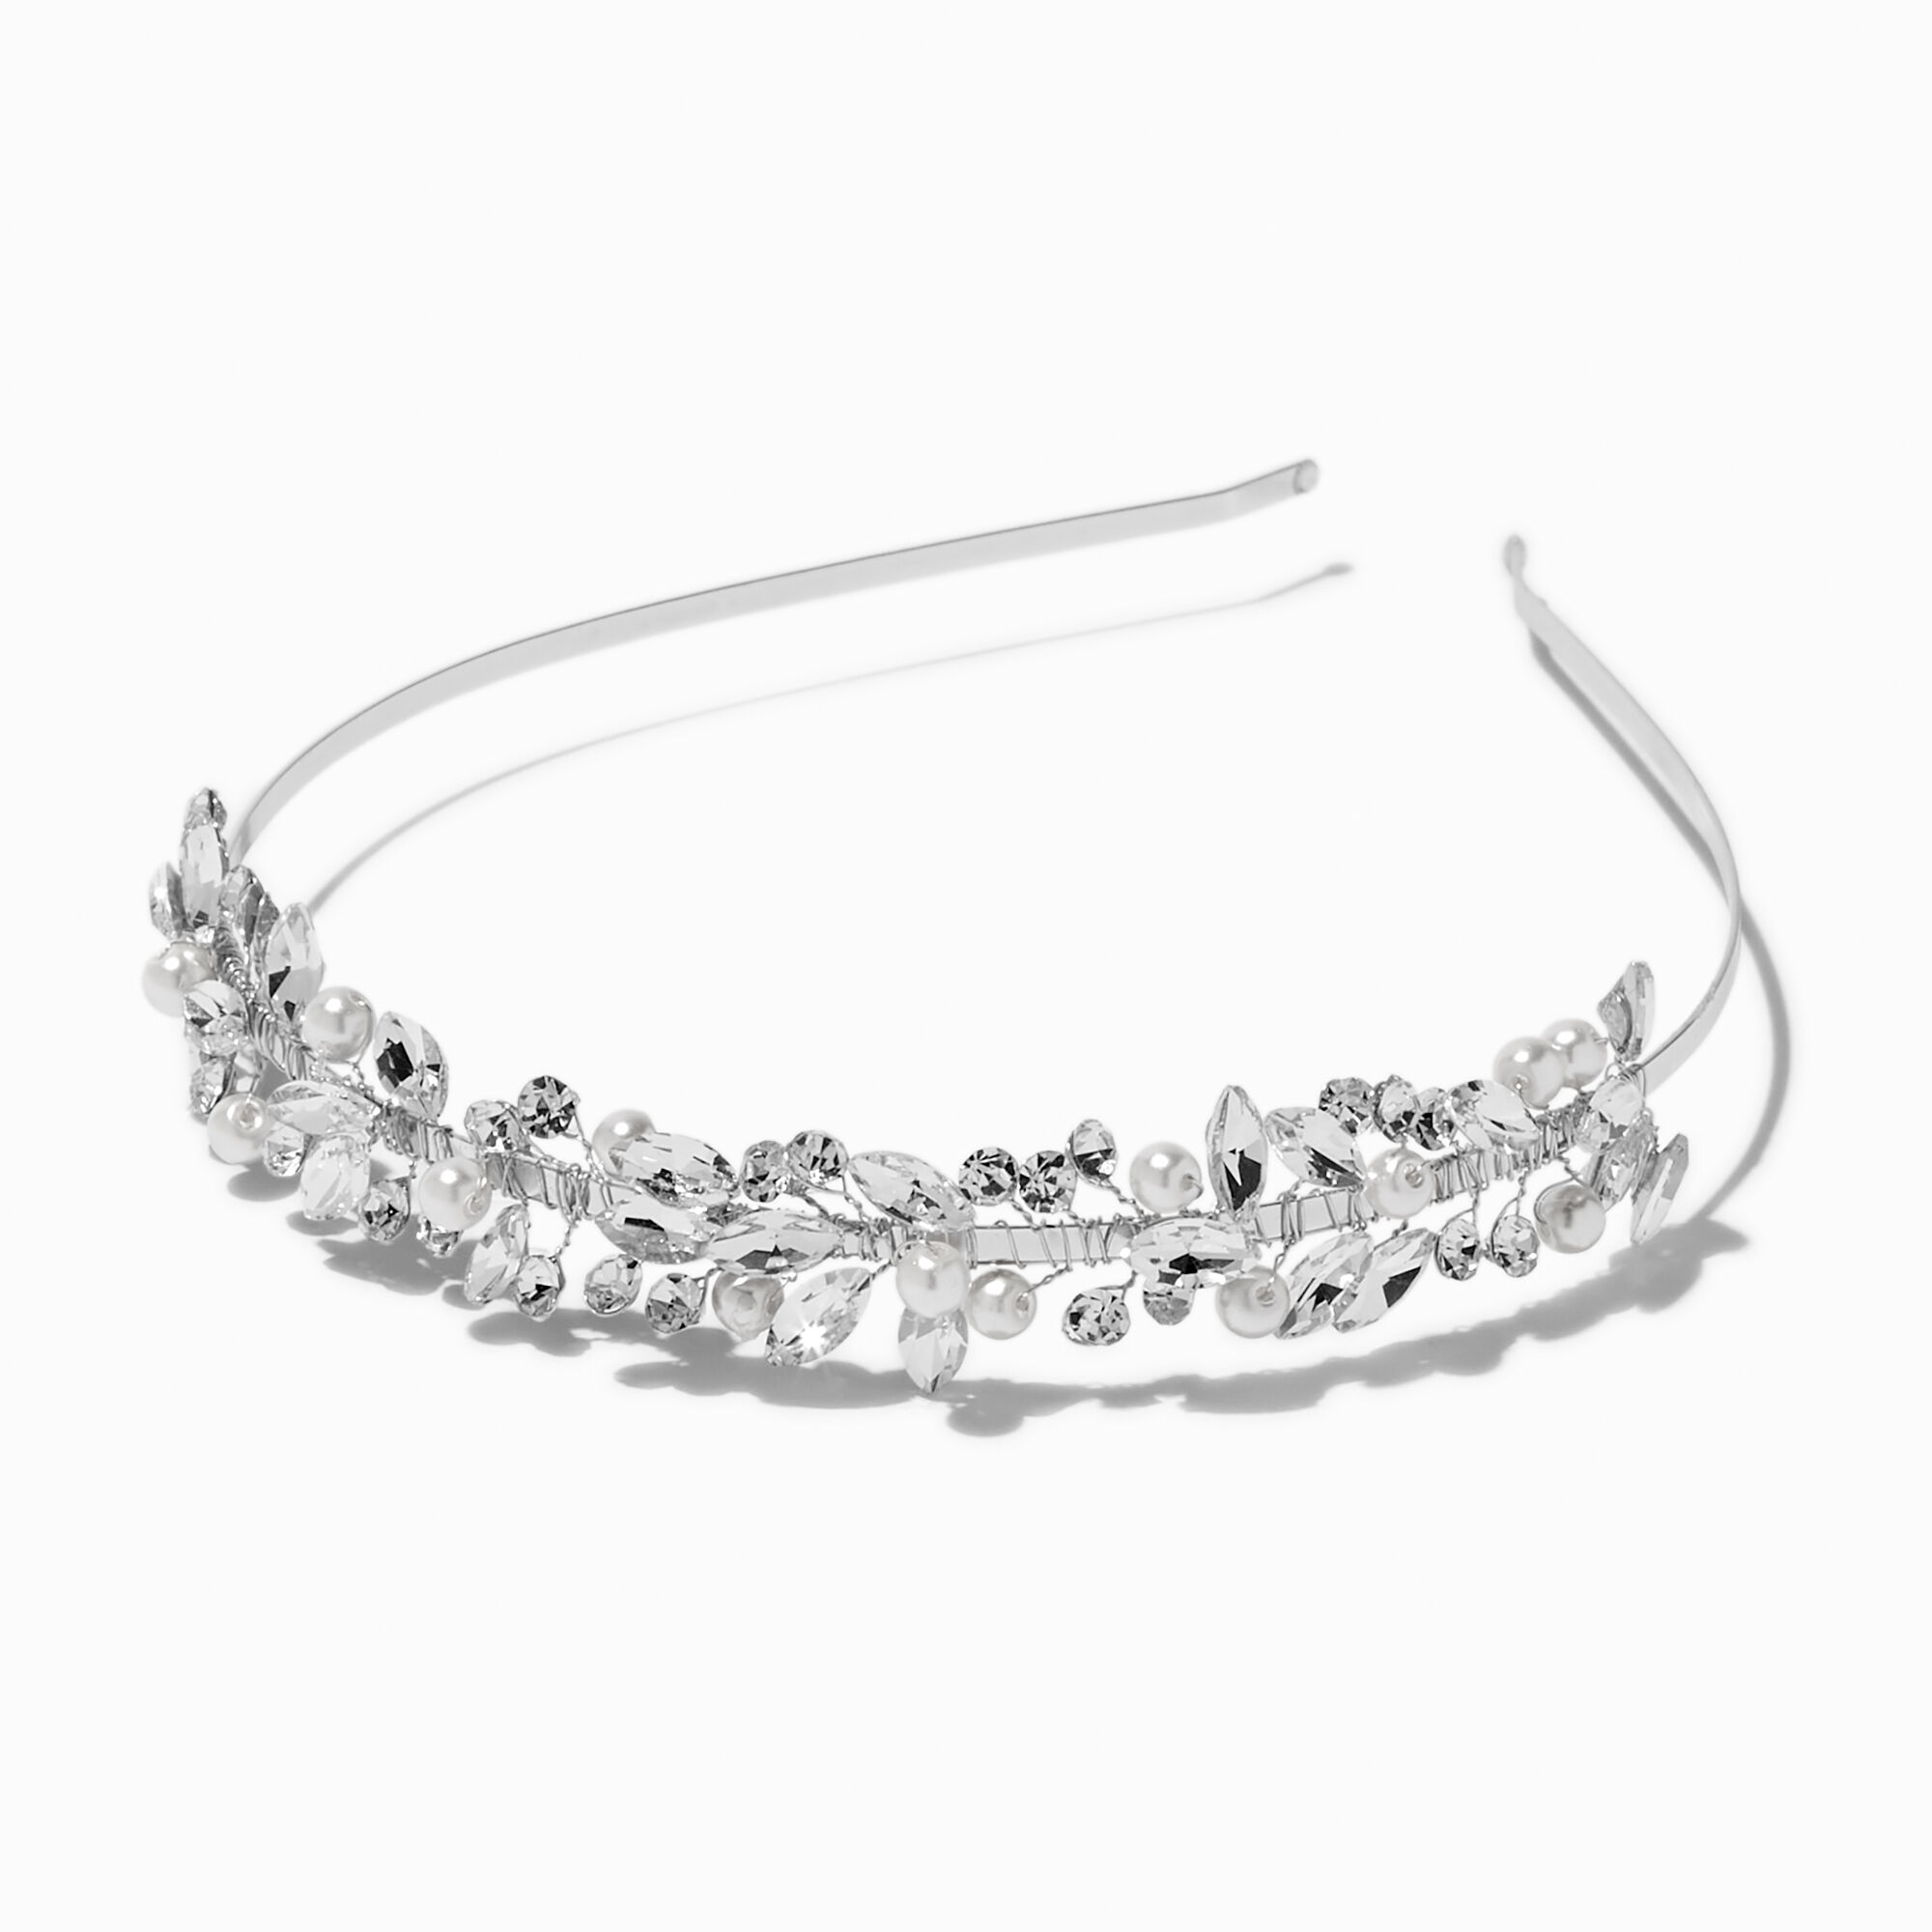 View Claires SilverTone Crystal Leaf Pearl Headband White information